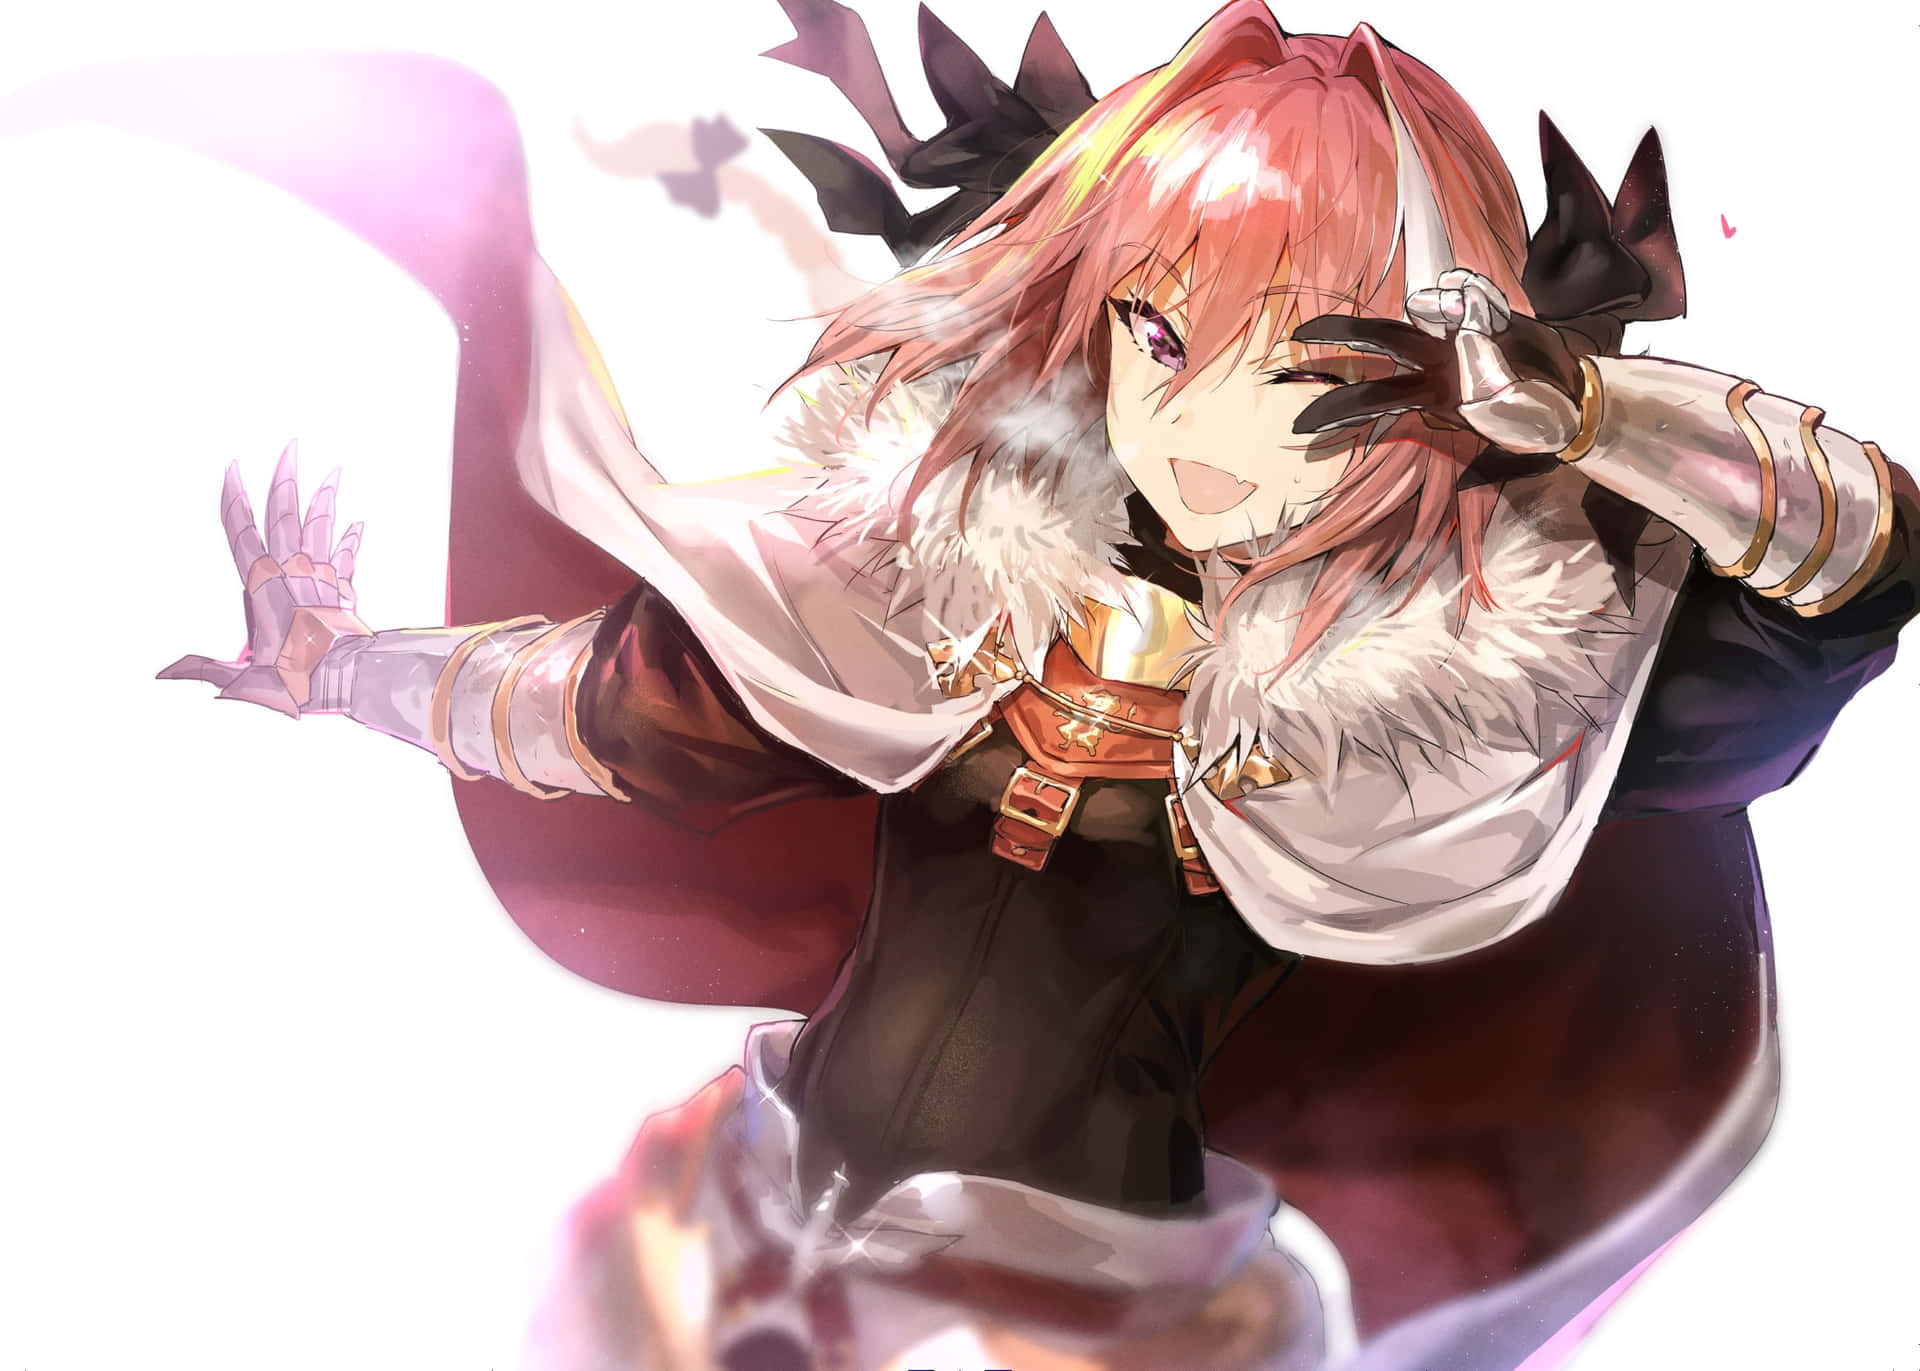 Astolfo in all of his Glory